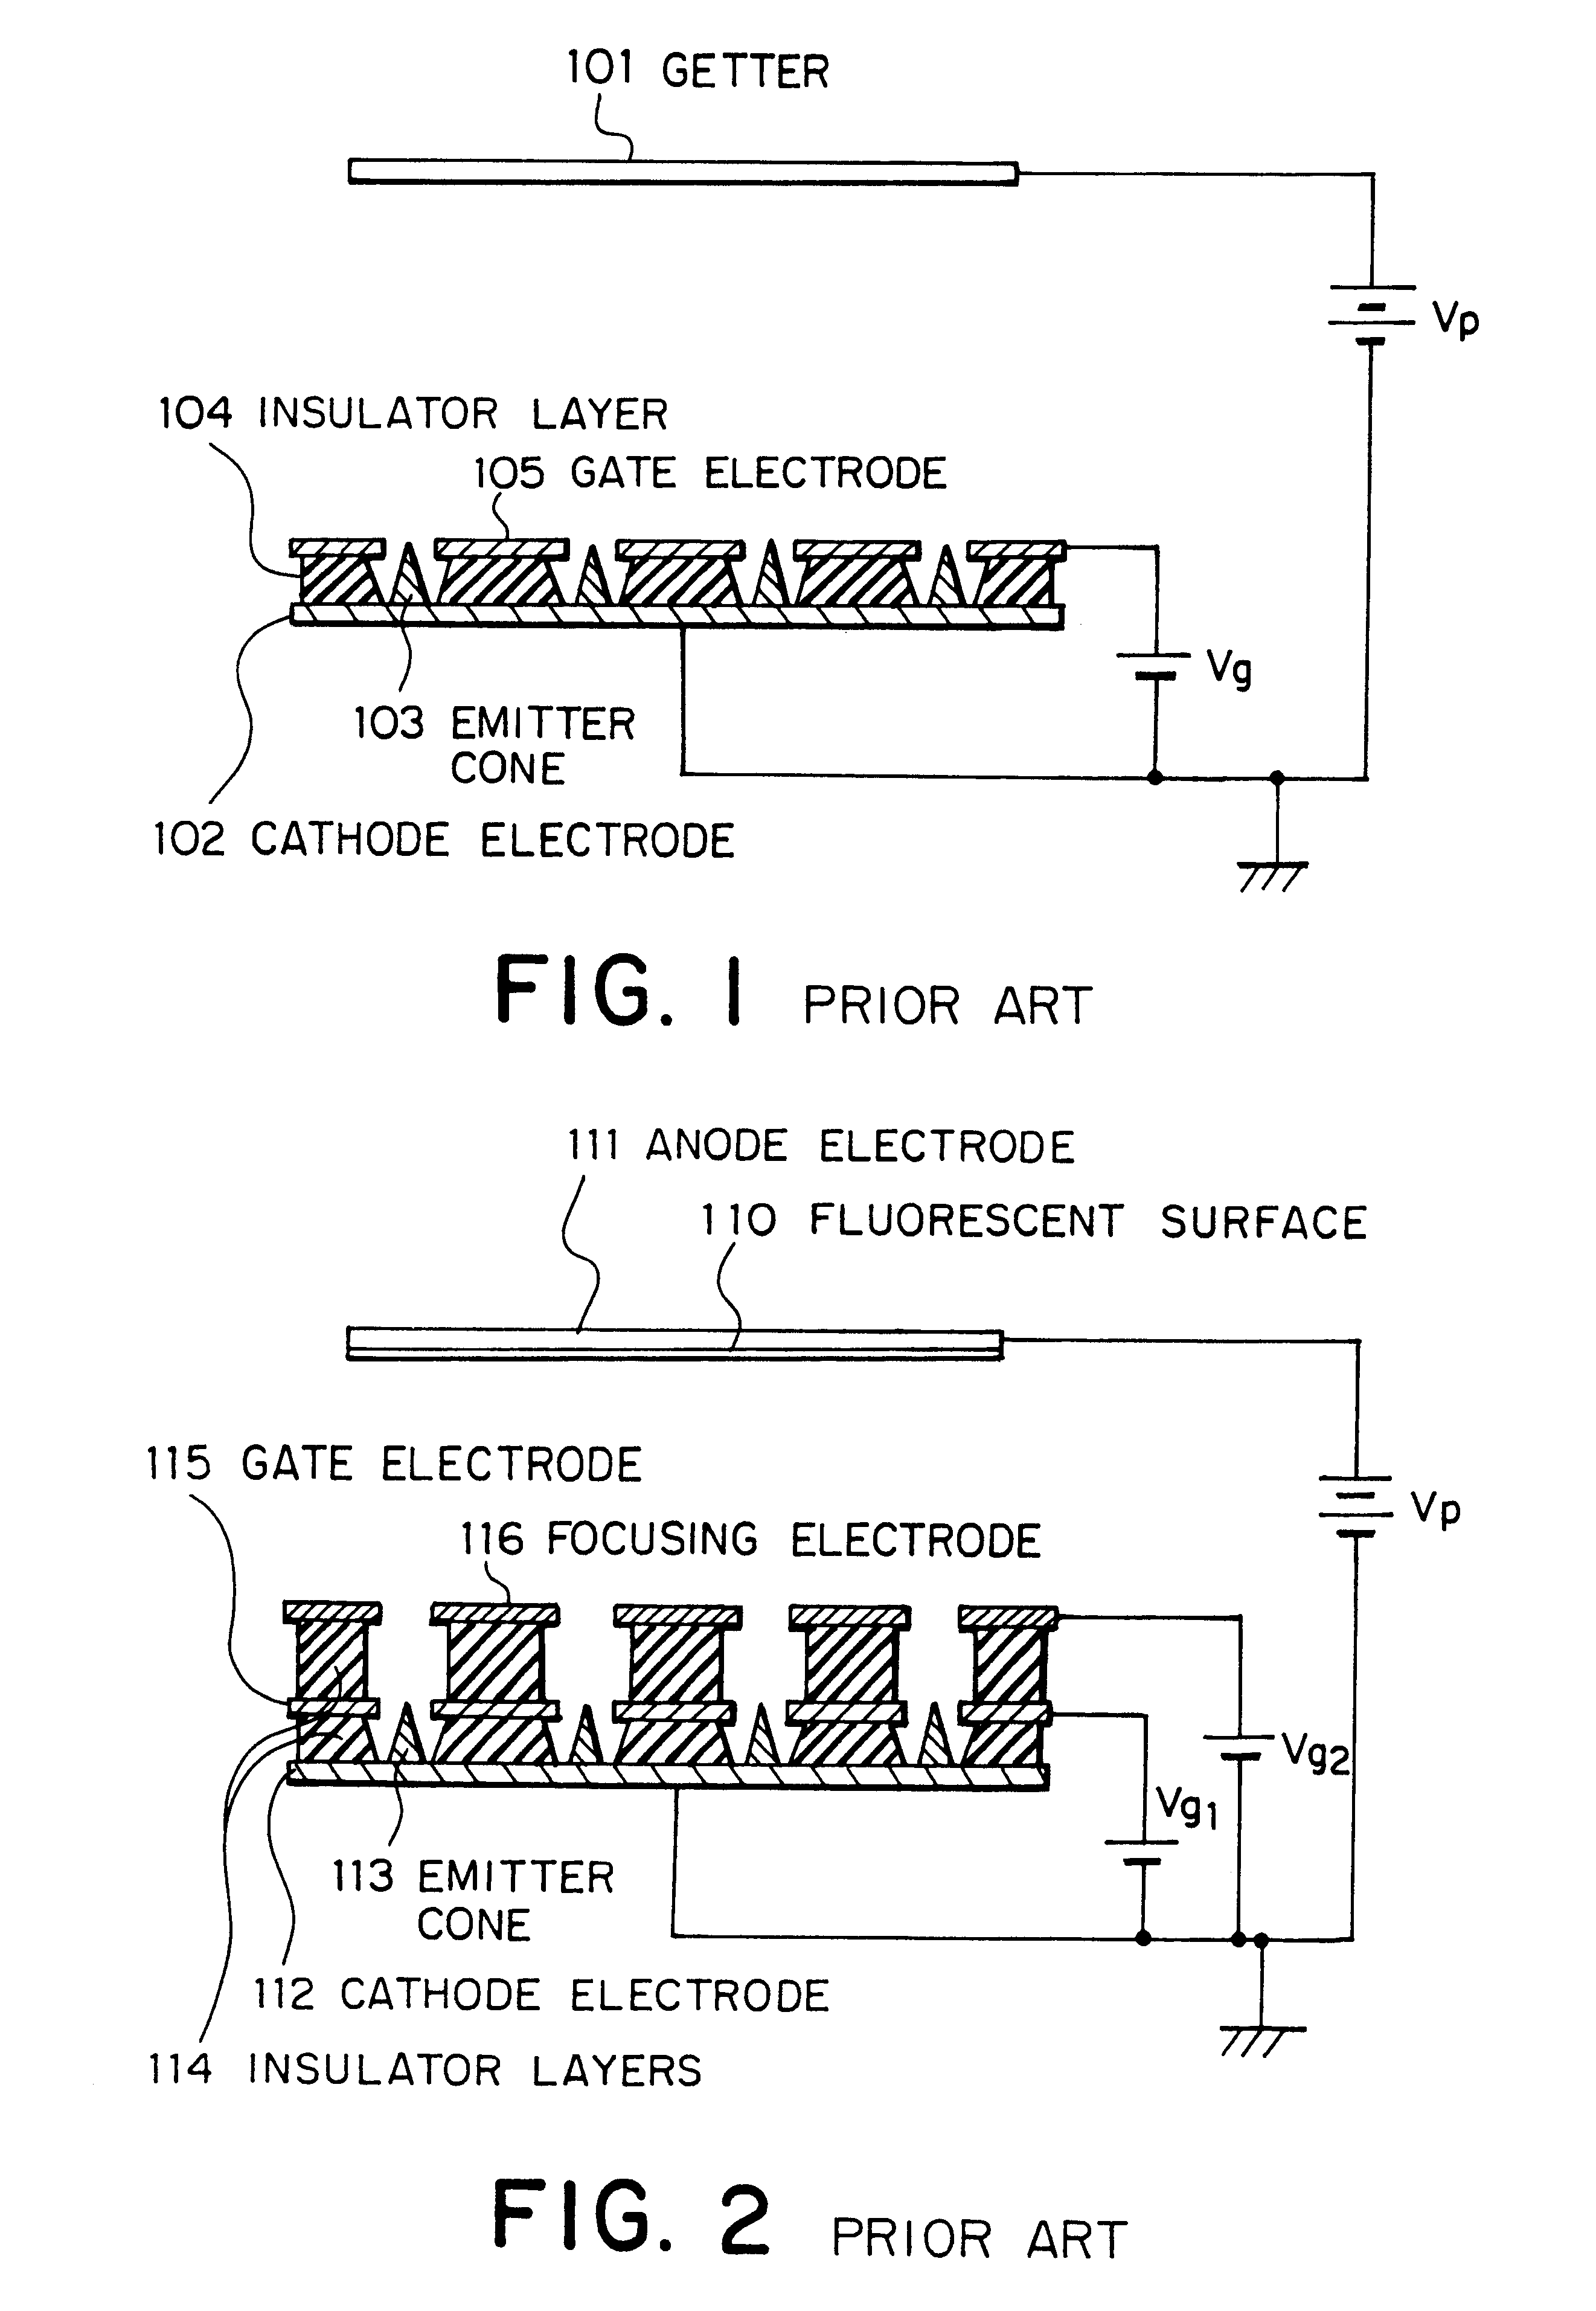 Micro vacuum pump for maintaining high degree of vacuum and apparatus including the same